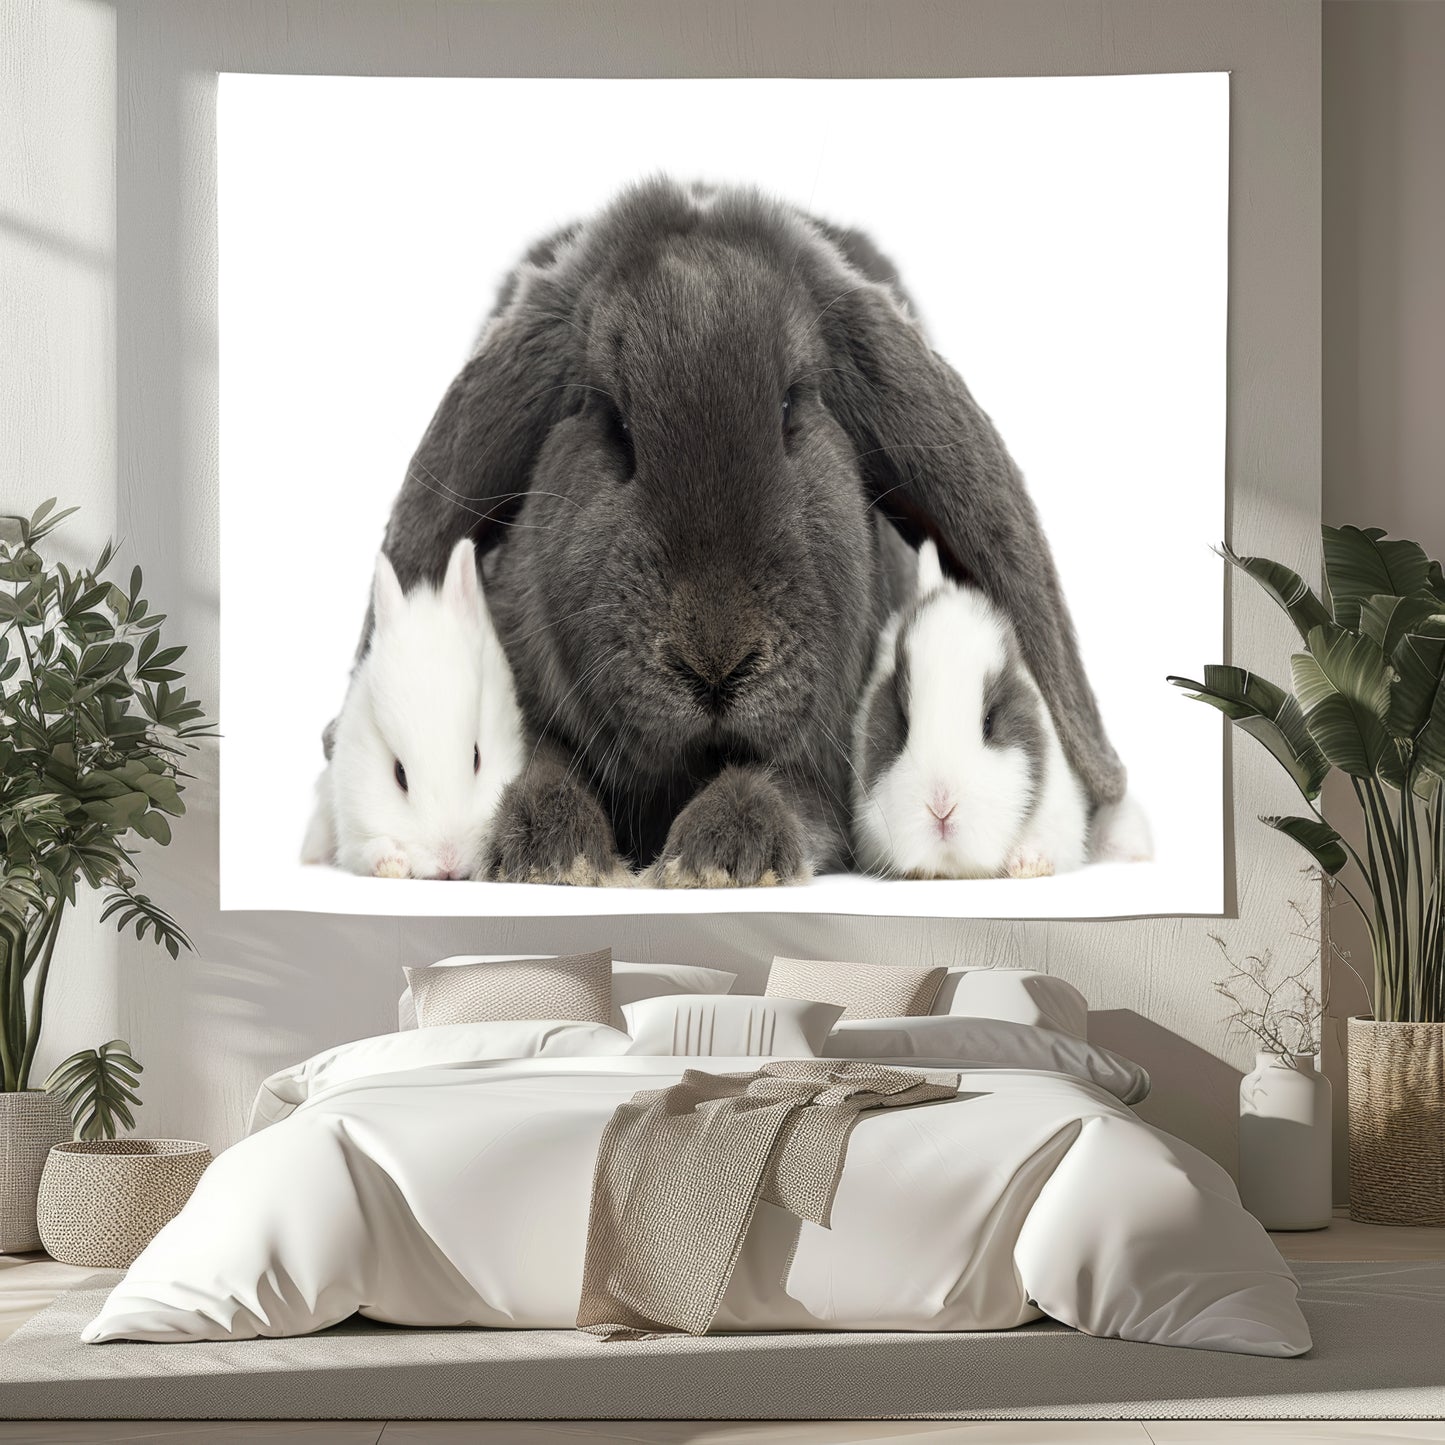 Rabbit family pattern tapestry, living room bedroom microfiber soft tapestry, suitable for various occasions and seasons